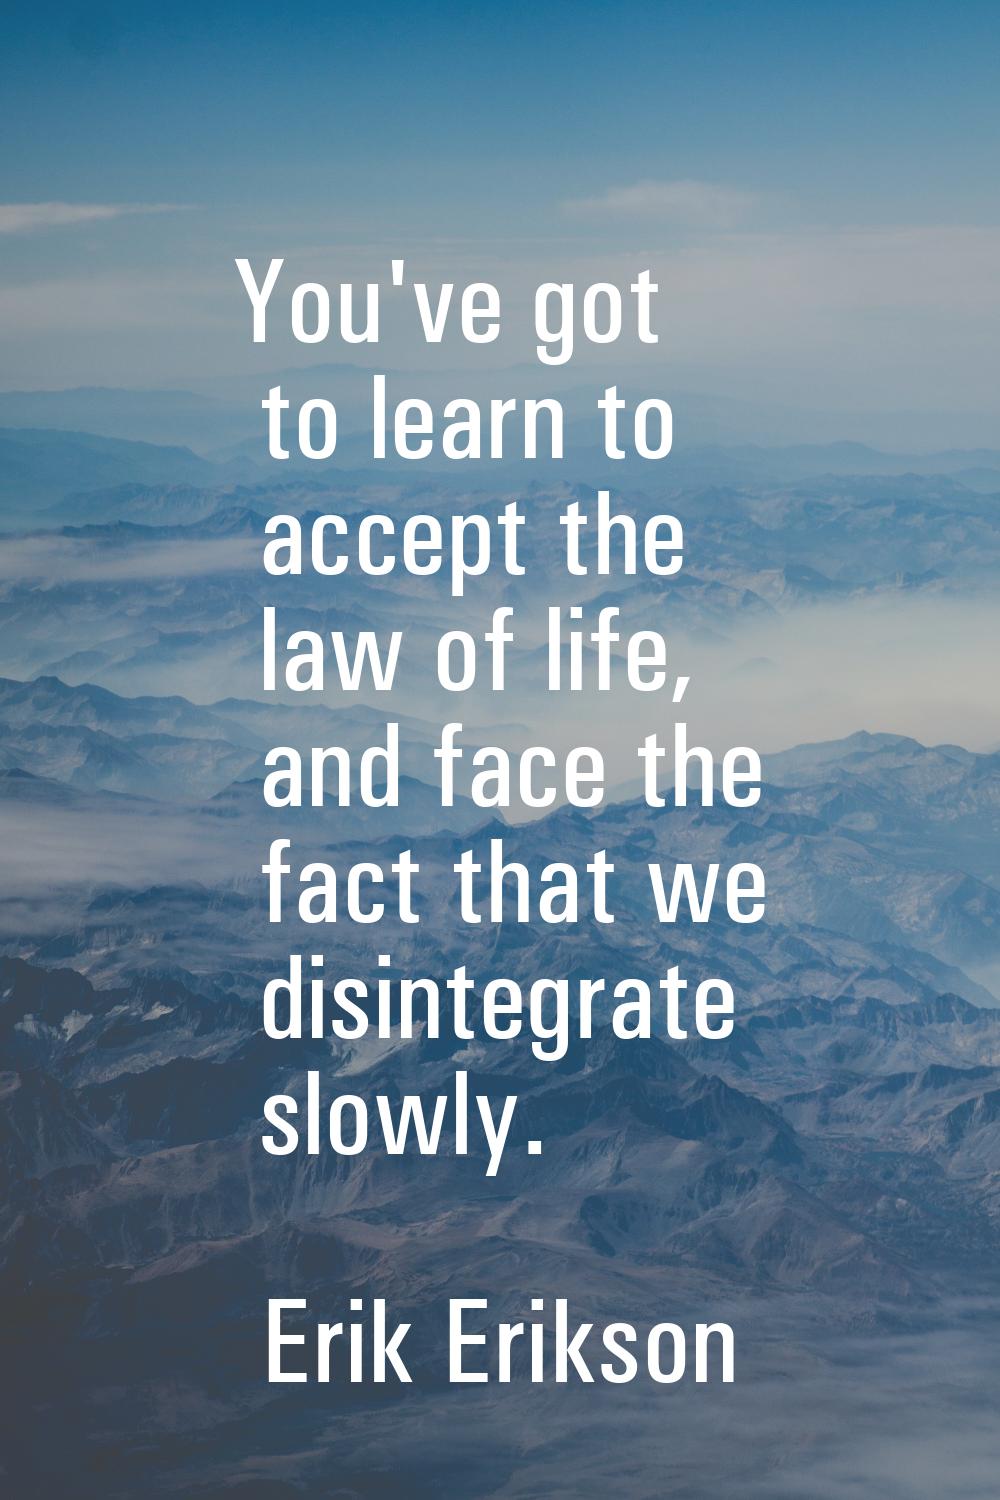 You've got to learn to accept the law of life, and face the fact that we disintegrate slowly.